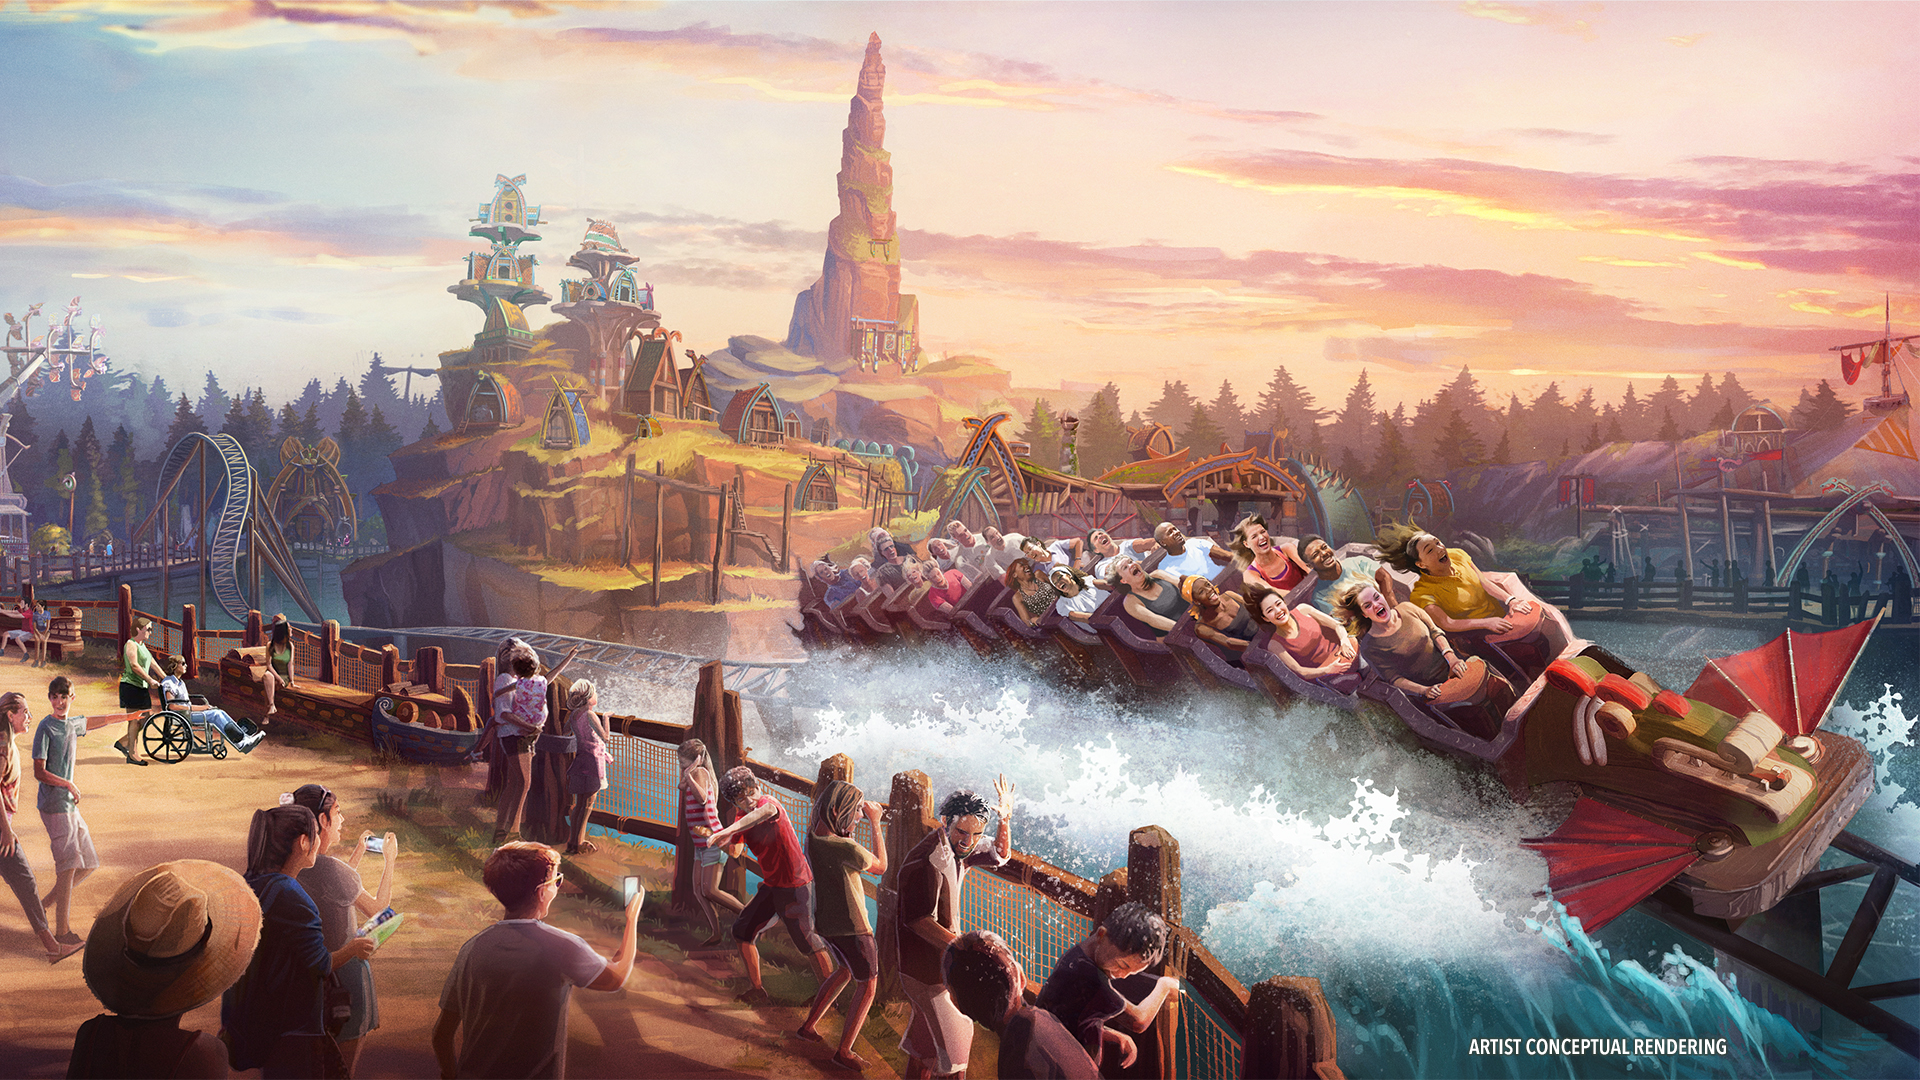 BREAKING: Universal Announces 3 NEW Rides for Epic Universe